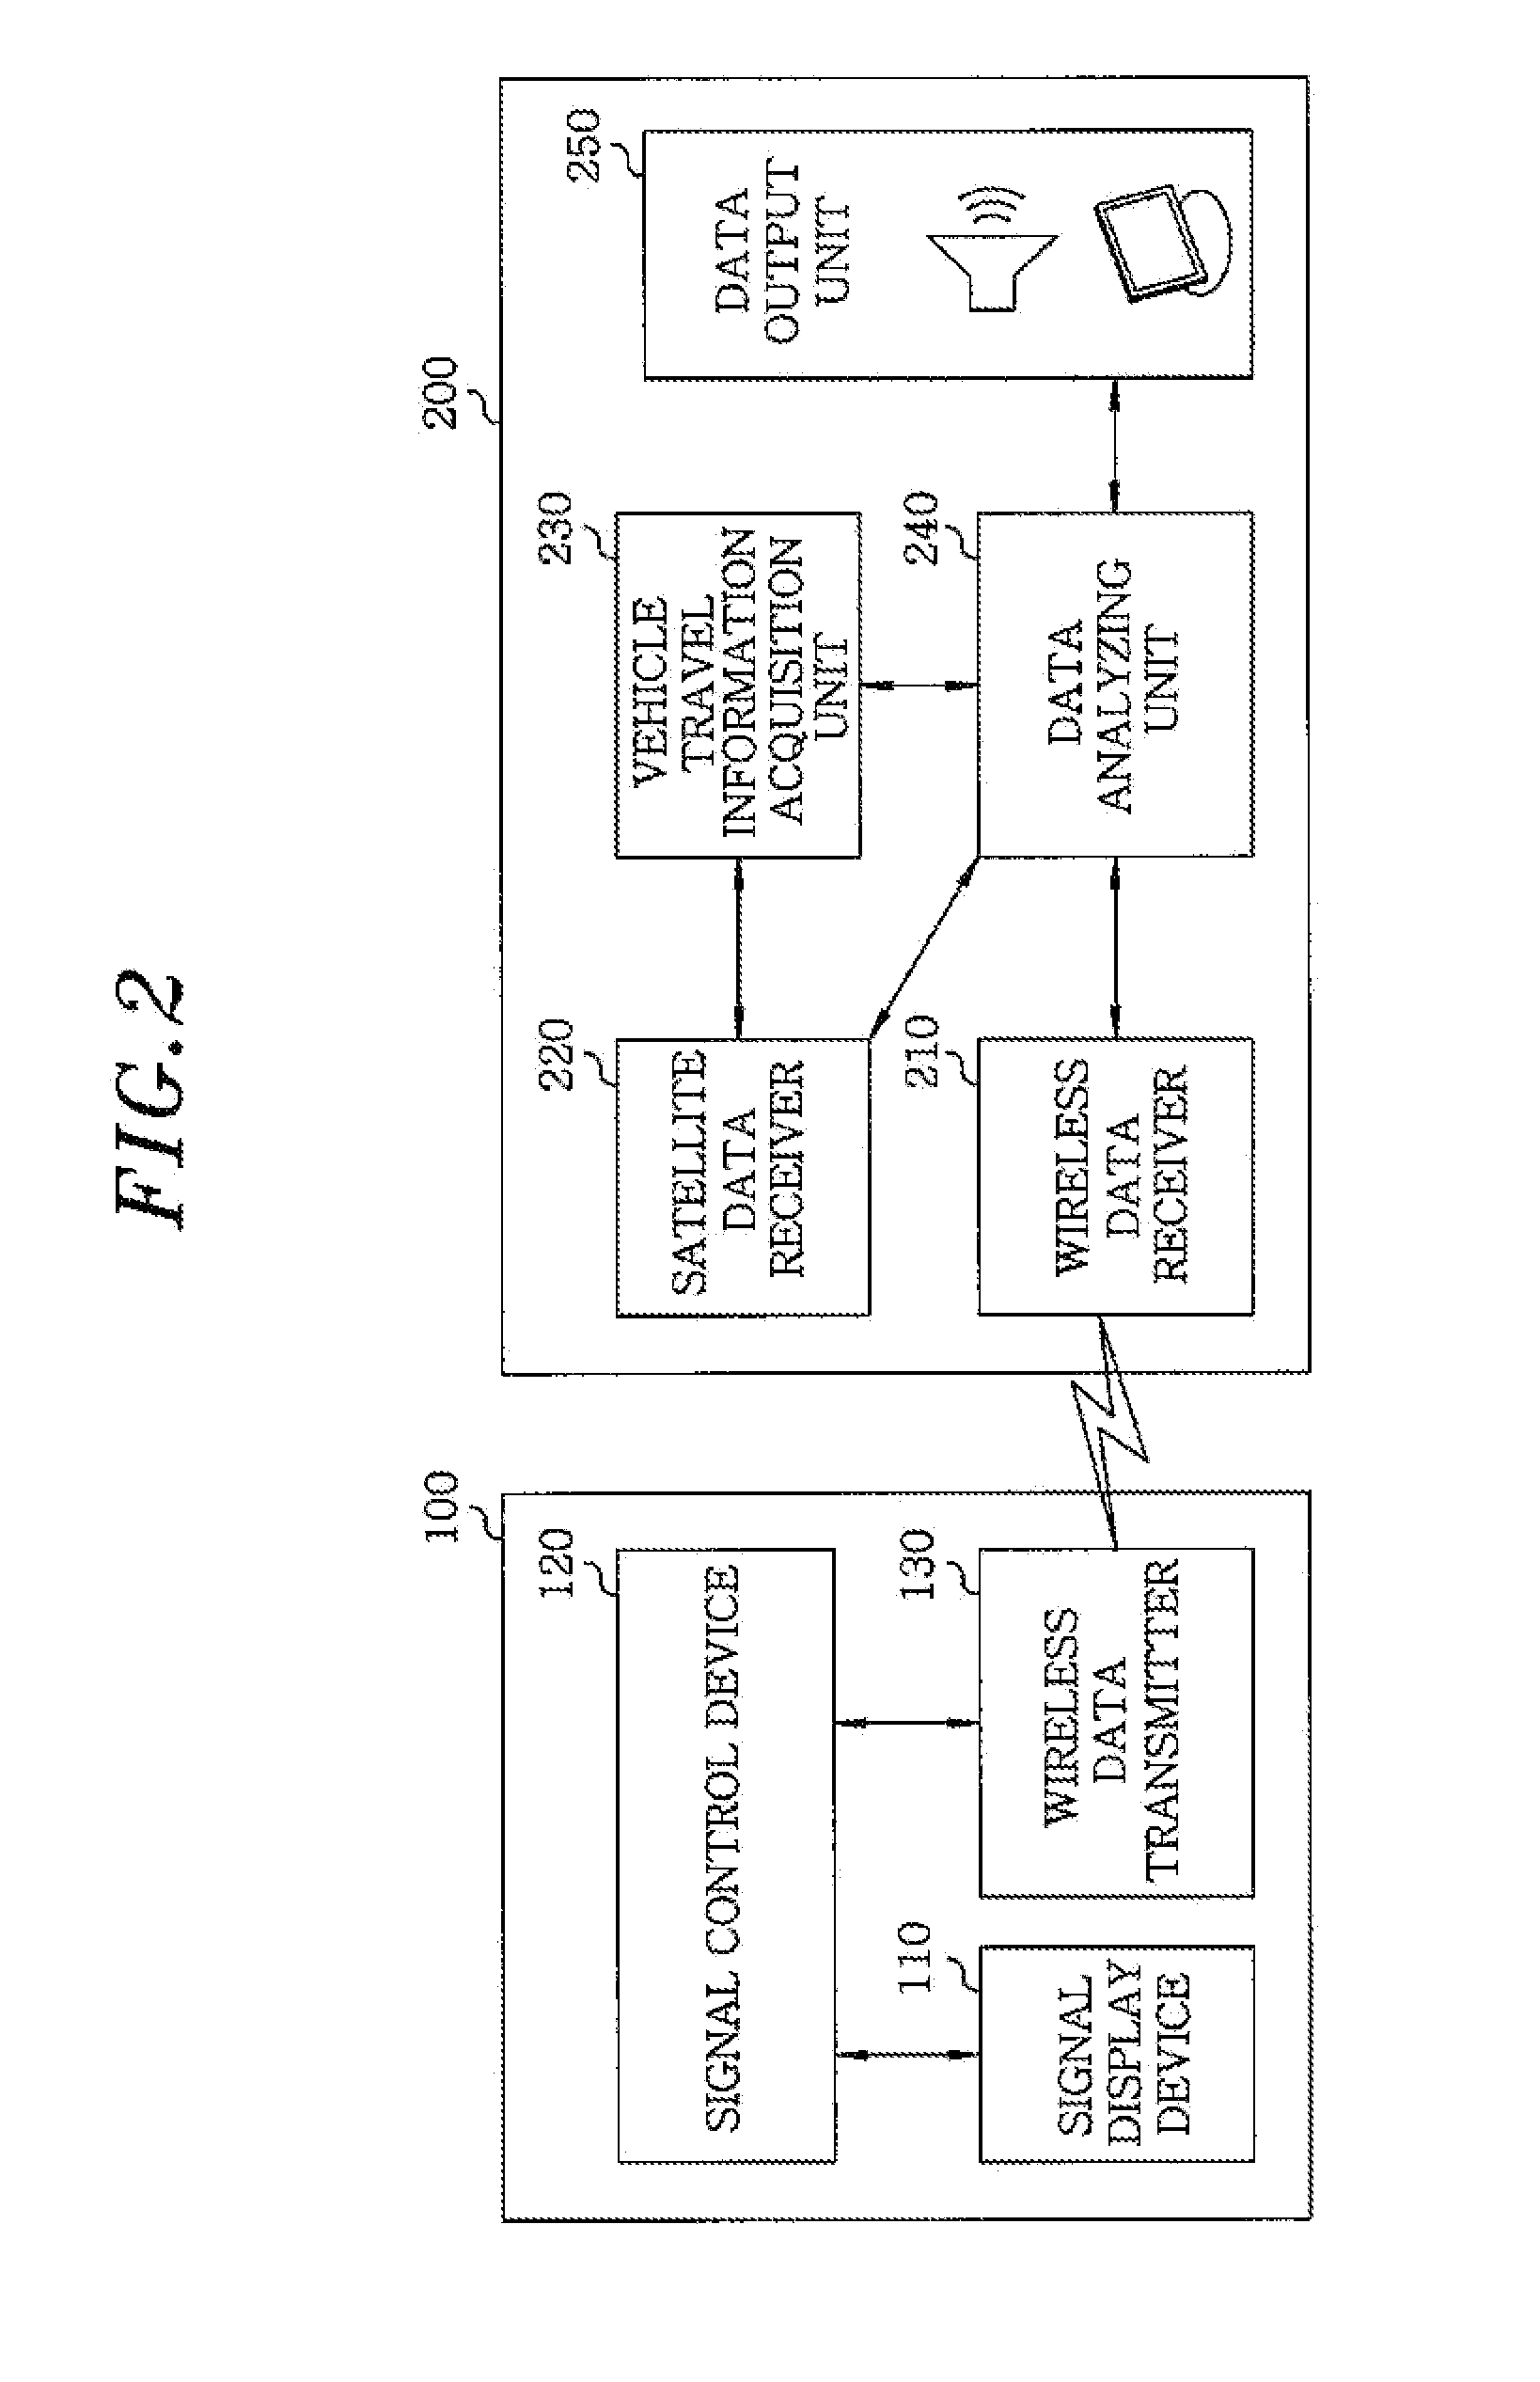 Apparatus and method for guiding intersection entry and standby time